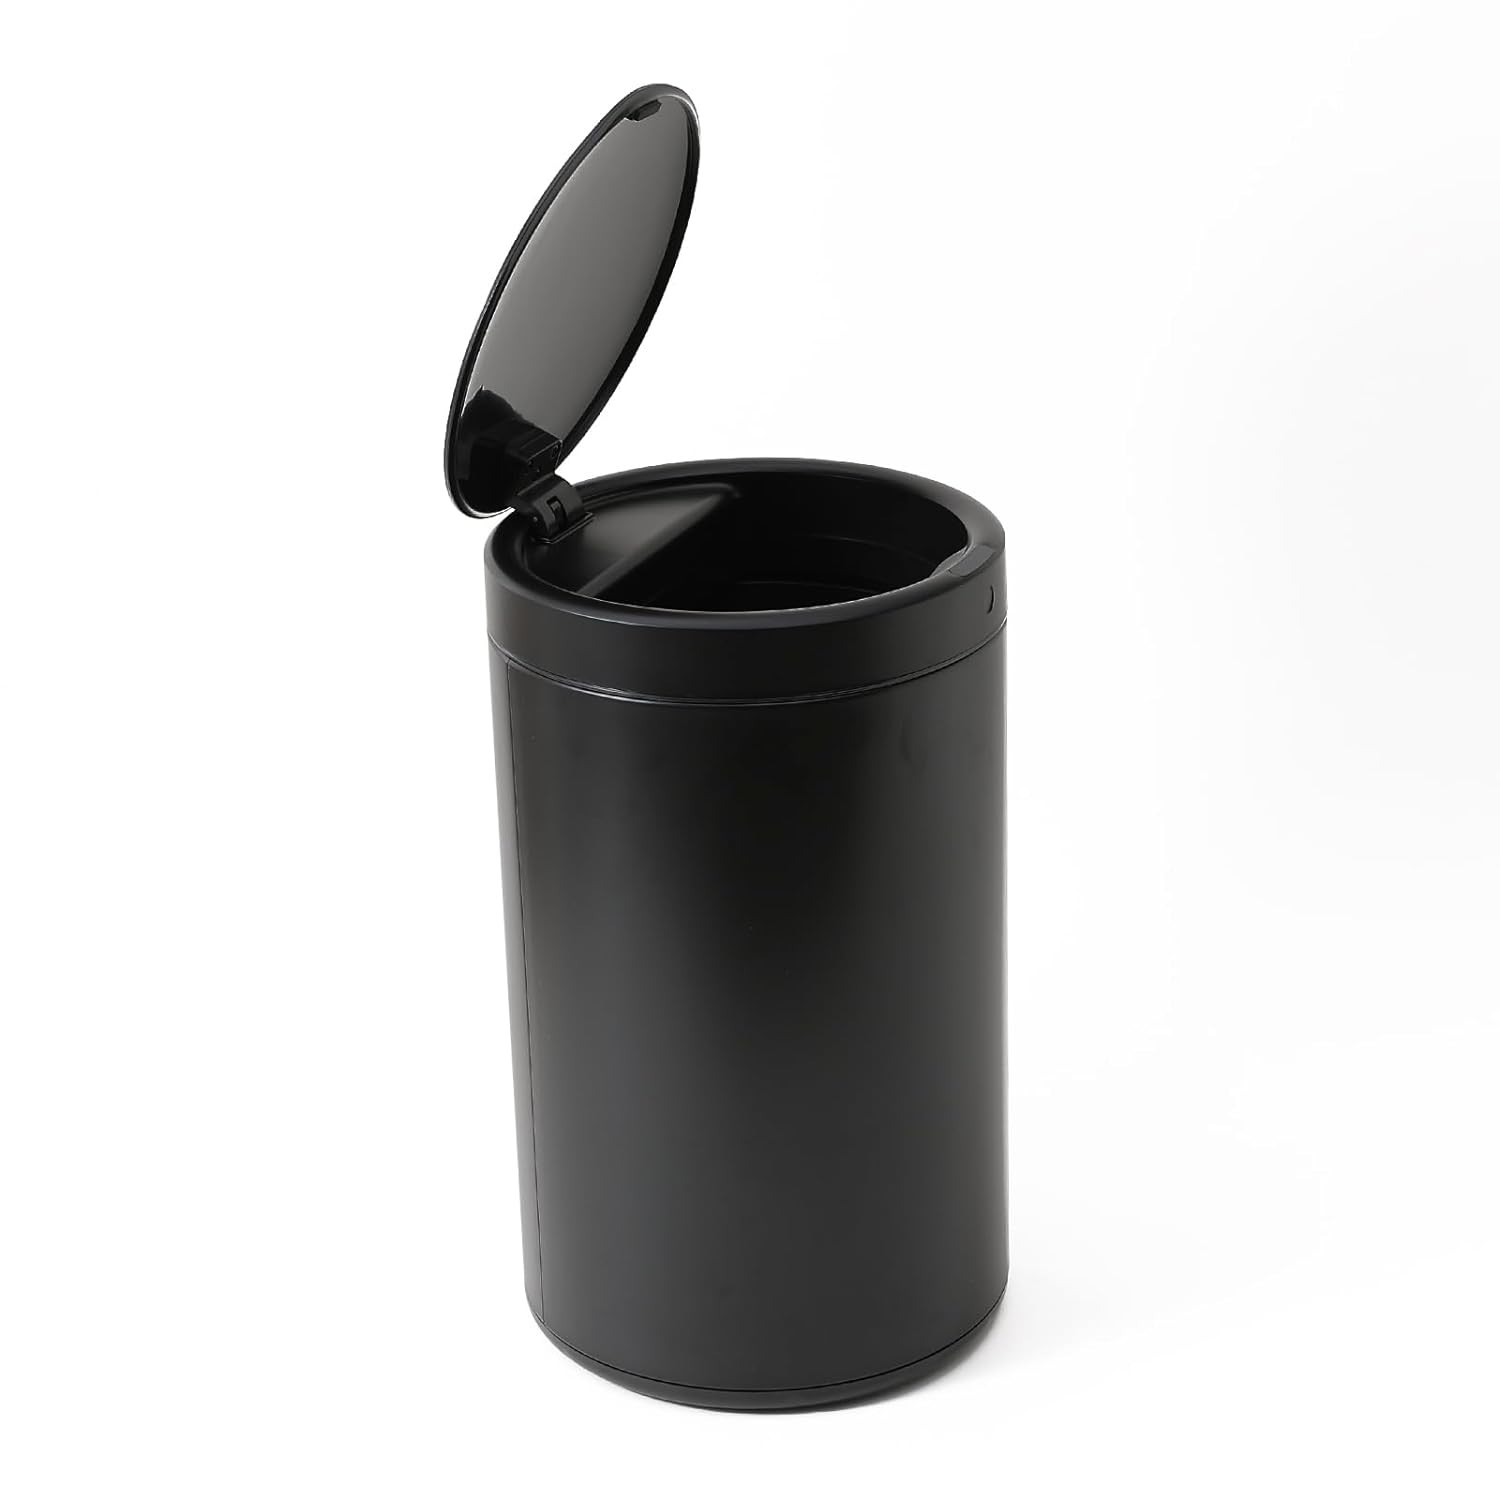 Kuber Industries Sensor Dustbin | Round Sensor Dustbin | Touchless Trash Can | Smart Dustbin for Bedroom-Office-Living Room | Automatic Garbage Can | HN-ZY-BLK-12L | Black